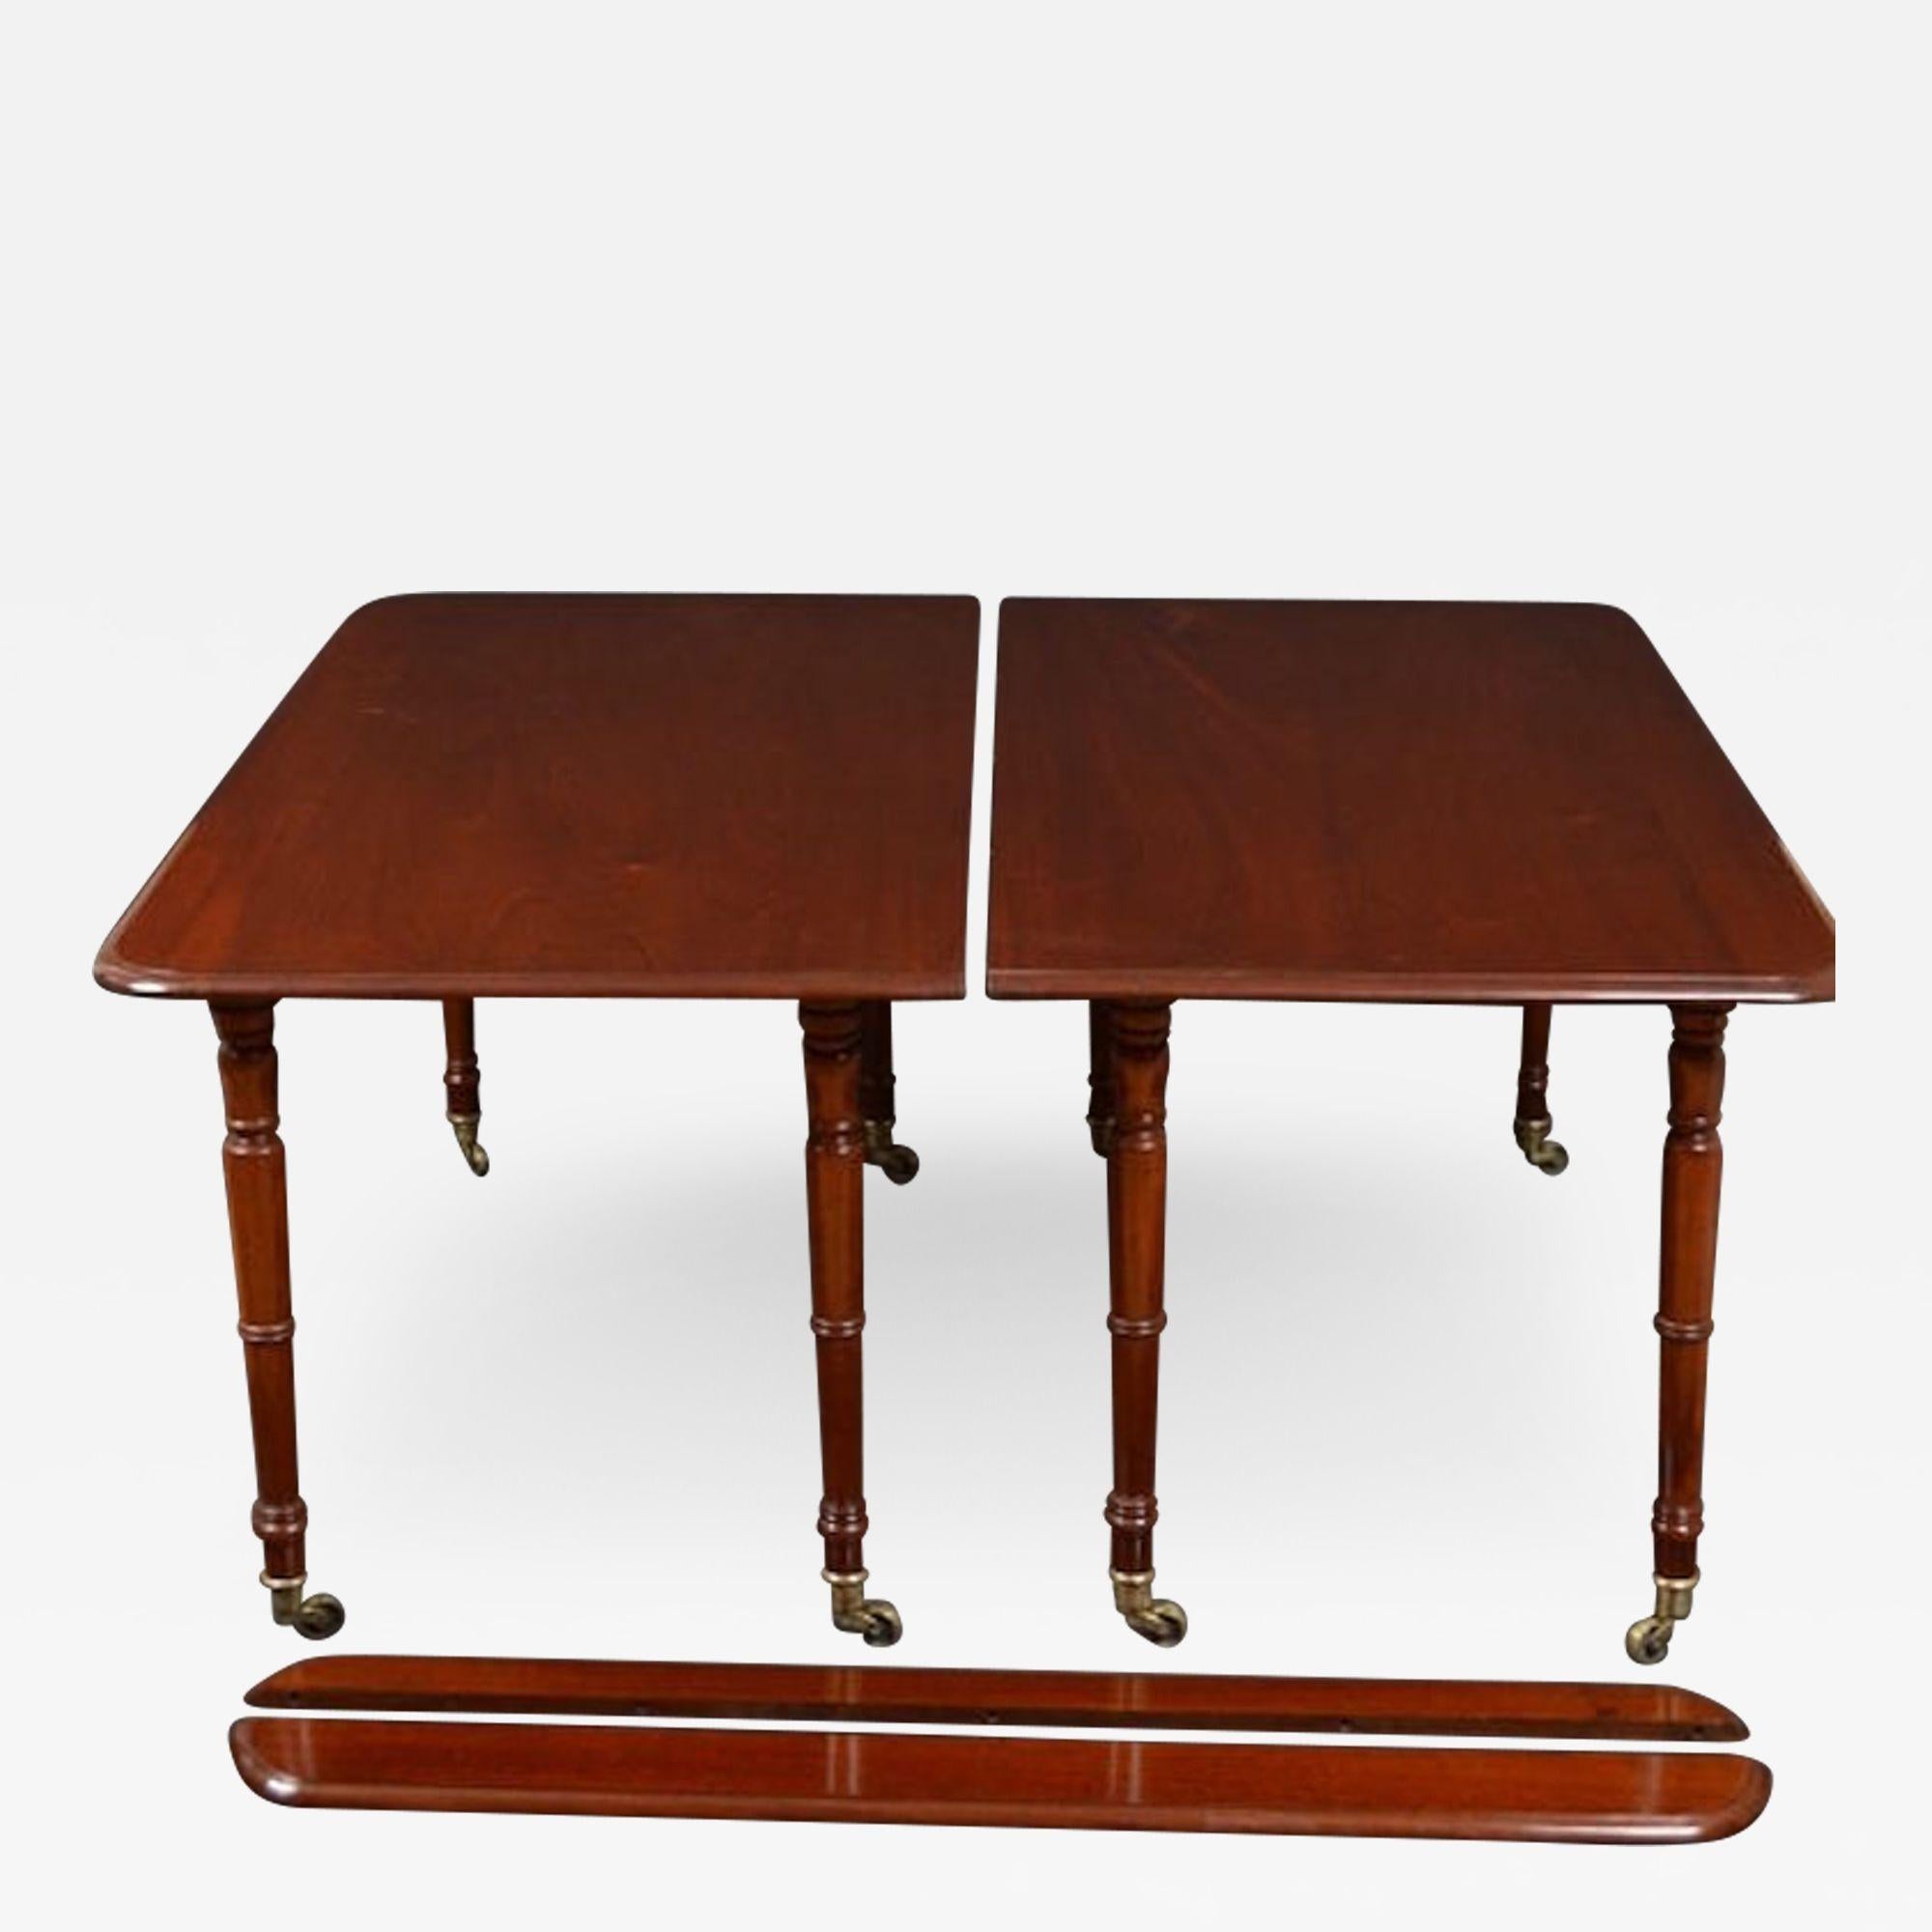 English William IV Mahogany Dining Table - Antique Dining Table For Sale